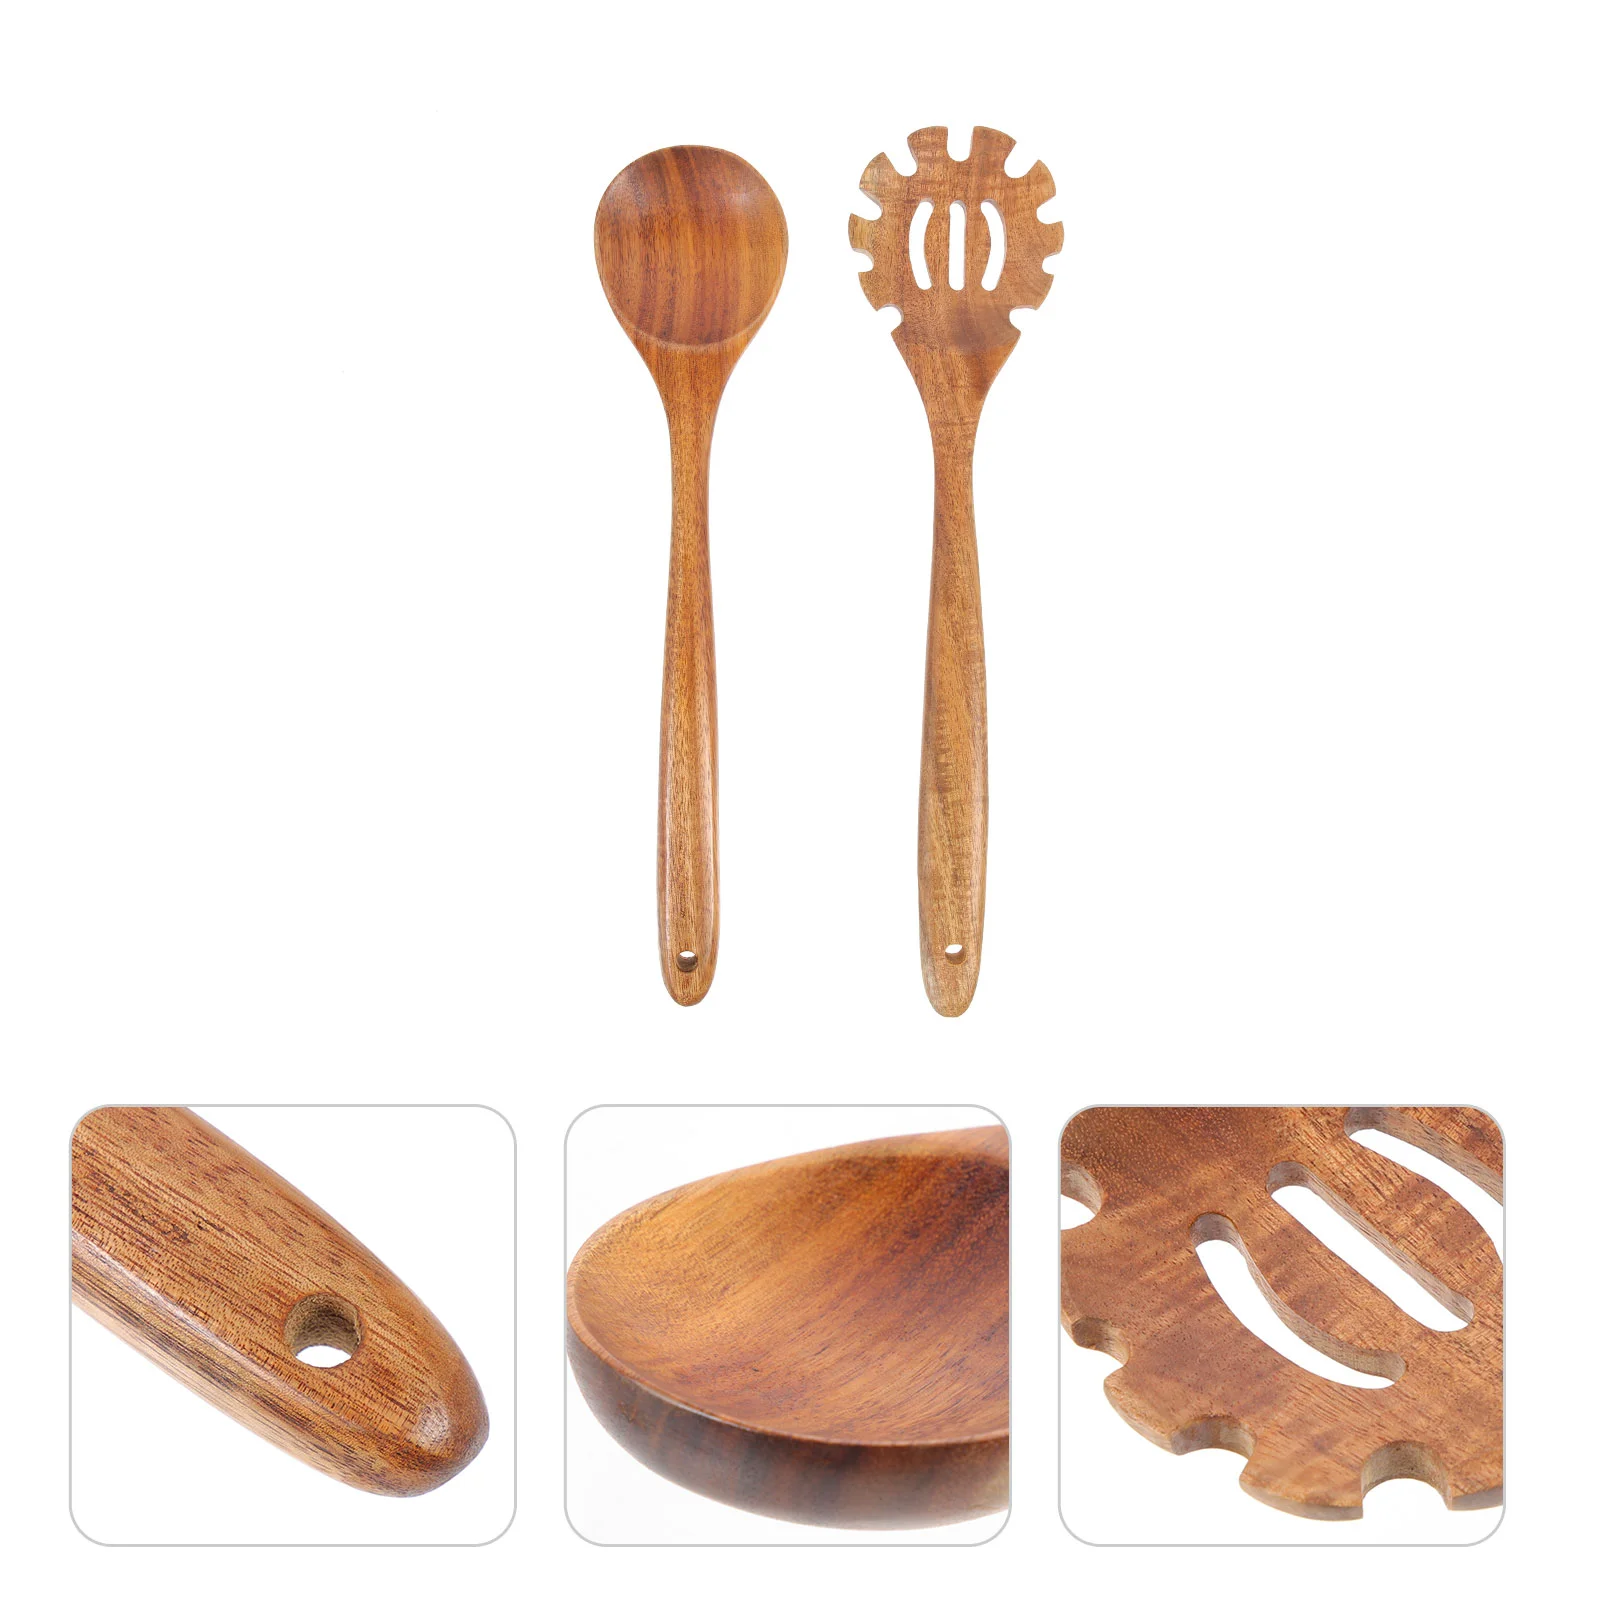 

Spoon Wooden Ladle Kitchen Soup Cooking Spaghetti Pasta Spoons Serving Slotted Mixing Utensils Rice Scooper Server Noodlescoop